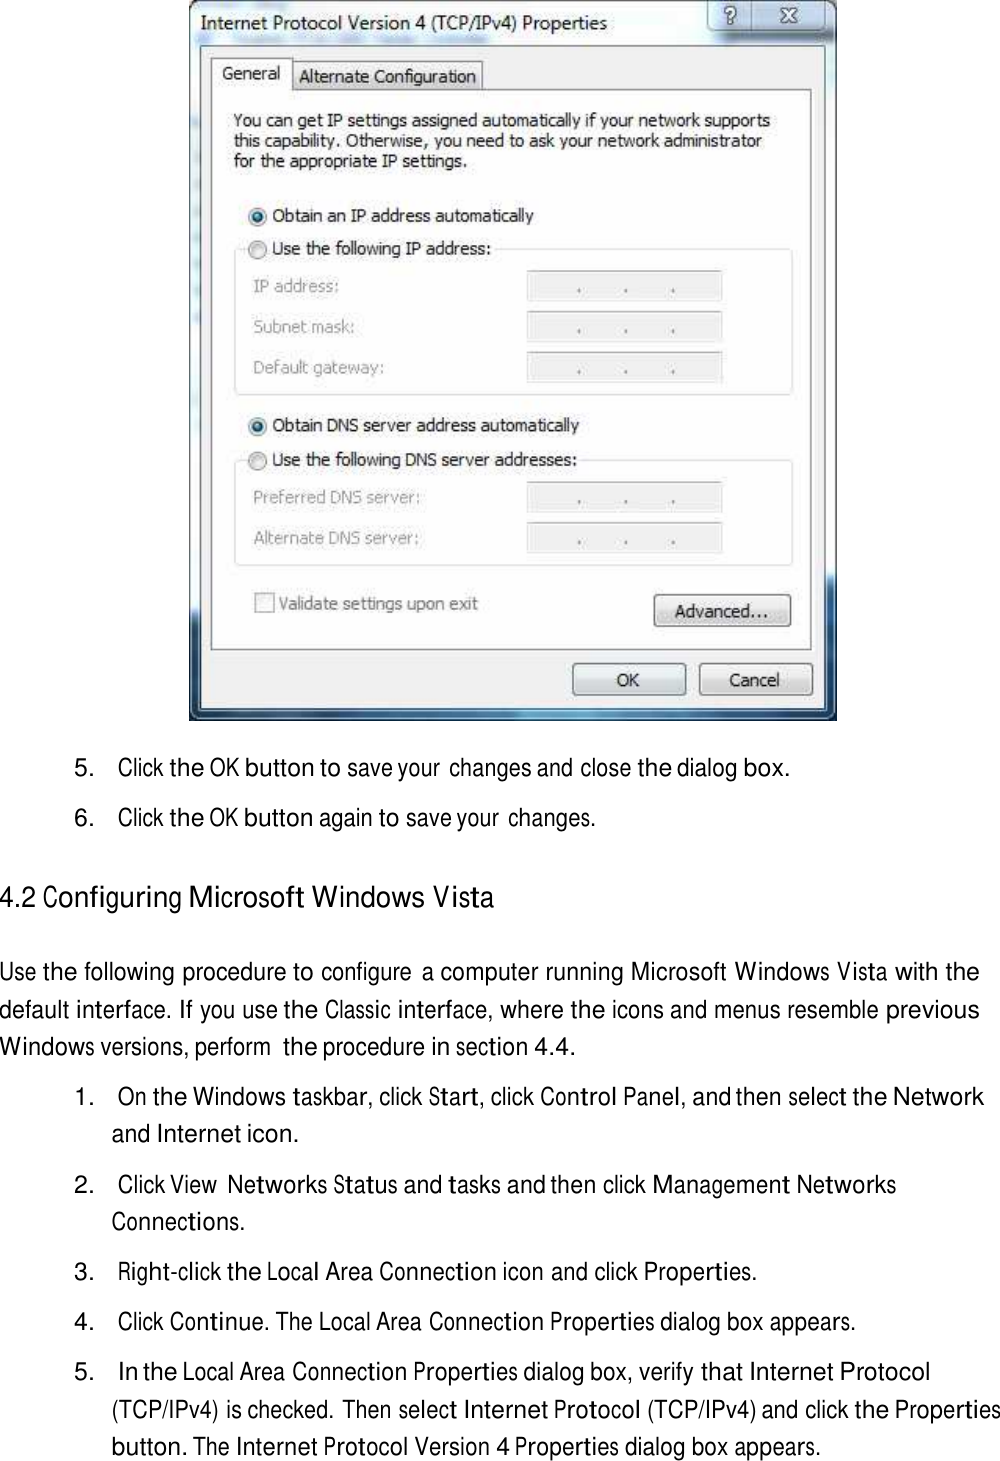     5. Click the OK button to save your  changes and close the dialog box.  6. Click the OK button again to save your changes.   4.2 Configuring Microsoft Windows Vista   Use the following procedure to configure  a computer running Microsoft Windows Vista with the default interface. If you use the Classic interface, where the icons and menus resemble previous Windows versions, perform the procedure in section 4.4.  1.   On the Windows taskbar, click Start, click Control Panel, and then select the Network and Internet icon.  2. Click View Networks Status and tasks and then click Management Networks Connections.  3. Right-click the Local Area Connection icon and click Properties.  4. Click Continue. The Local Area Connection Properties dialog box appears.  5.   In the Local Area Connection Properties dialog box, verify that Internet Protocol (TCP/IPv4) is checked. Then select Internet Protocol (TCP/IPv4) and click the Properties button. The Internet Protocol Version 4 Properties dialog box appears. 